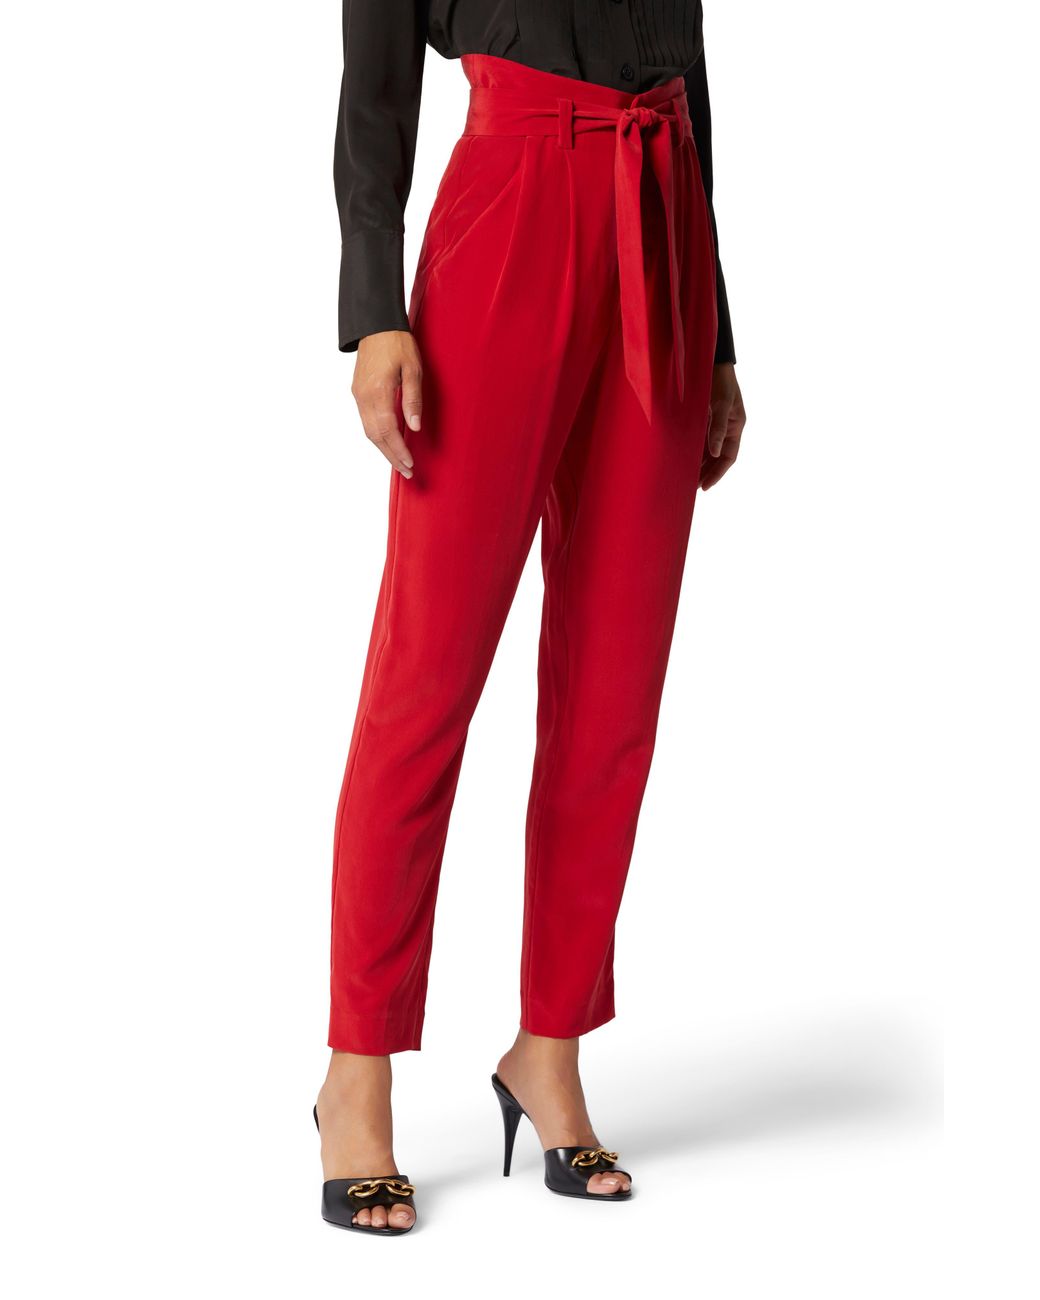 Carlisle Womens Pants Size 6 Red Cotton Silk Textured High Rise Straight  Trouser